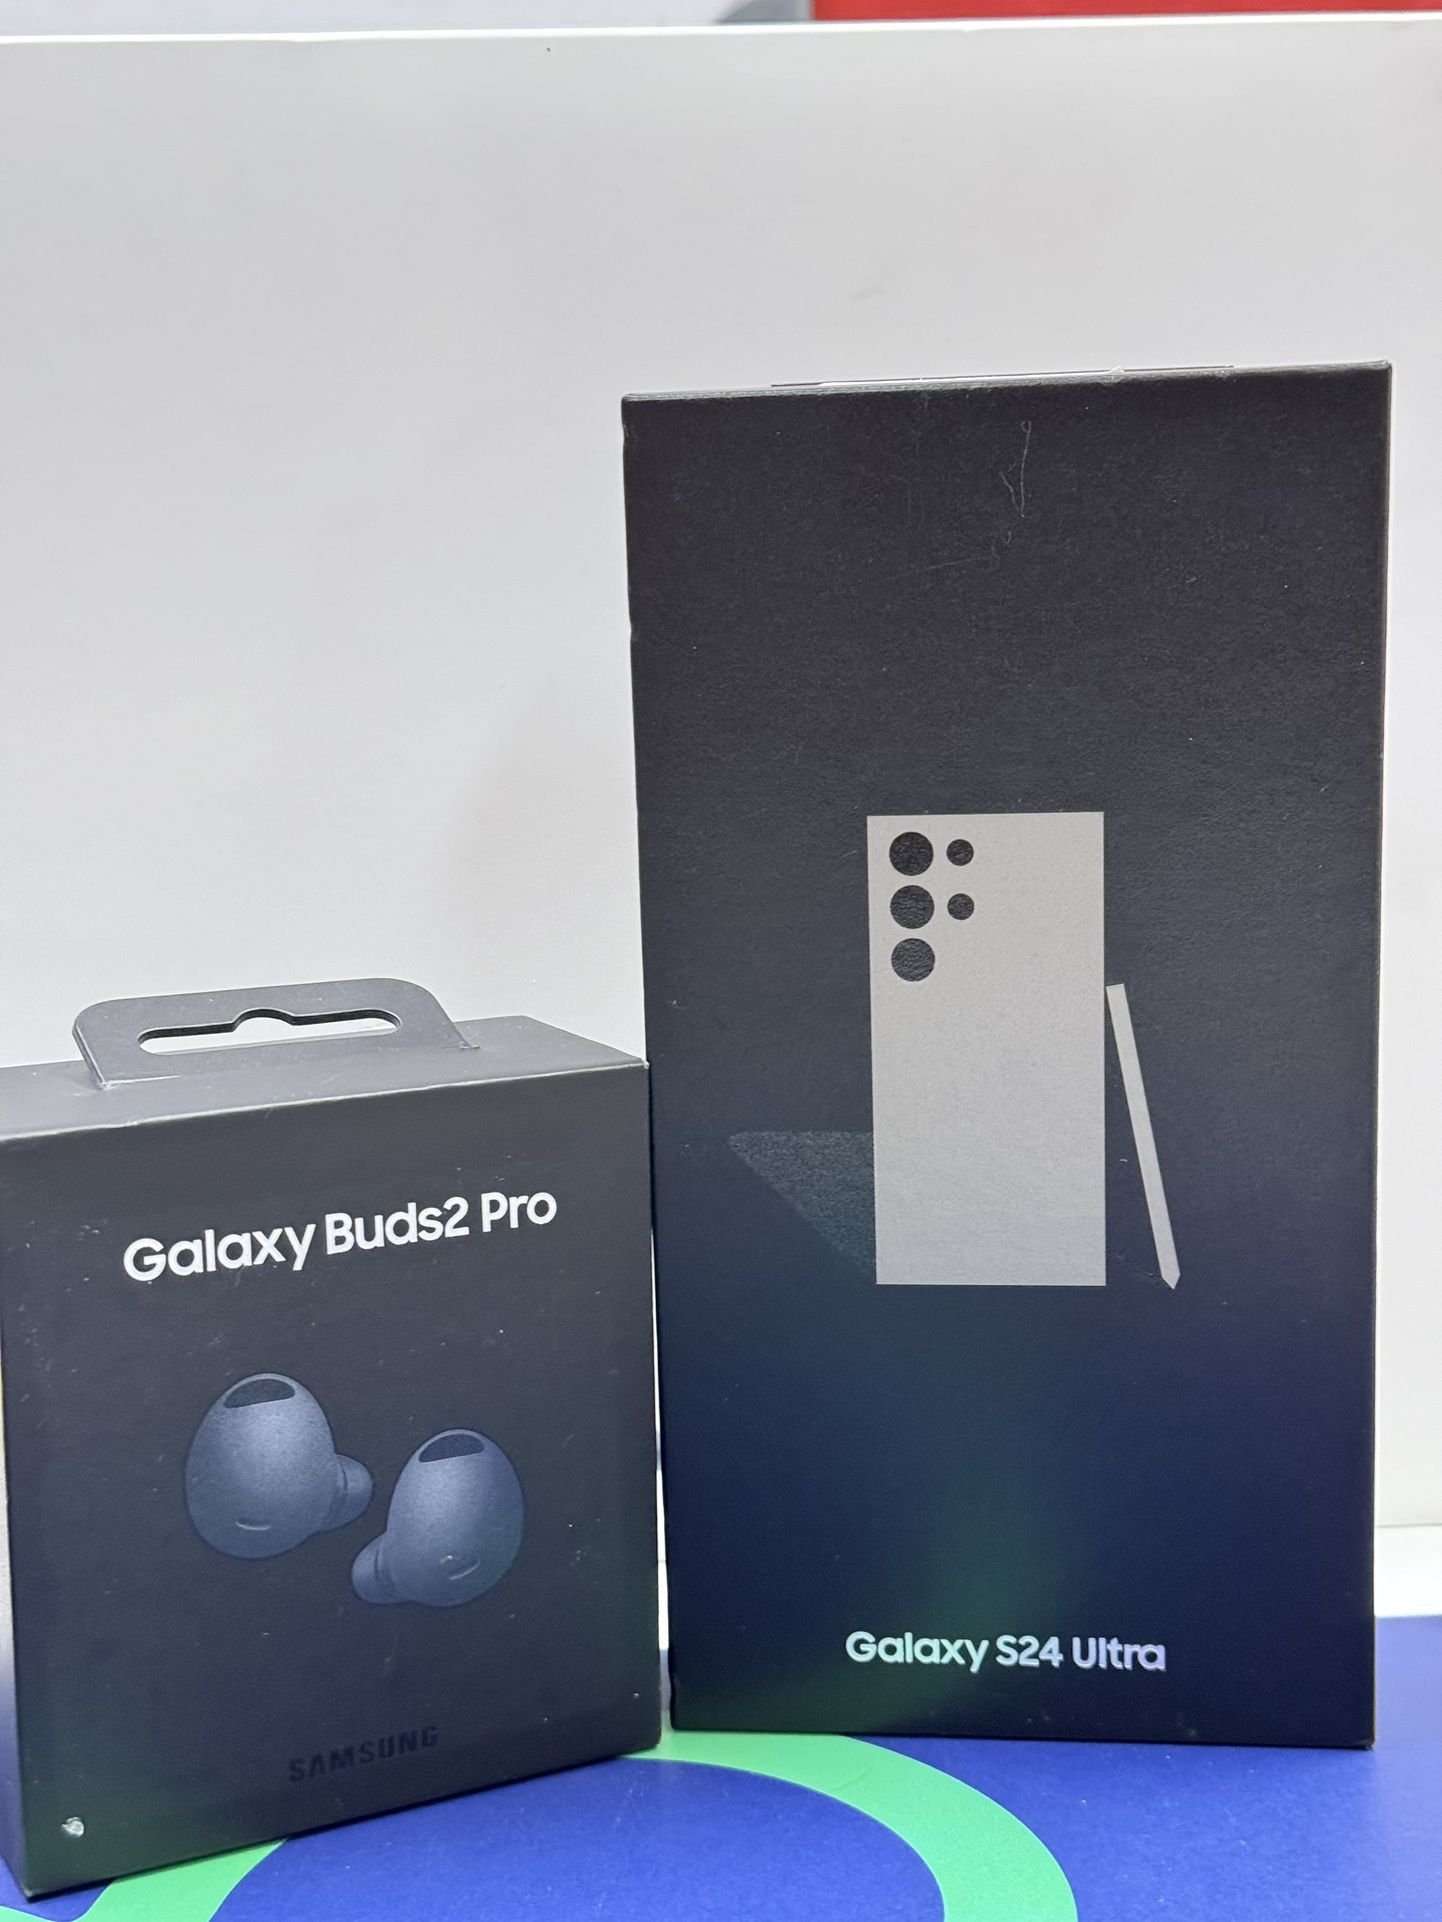 Samsung Galaxy S24 Ultra With Galaxy Buds2 Pro Available On Payments 